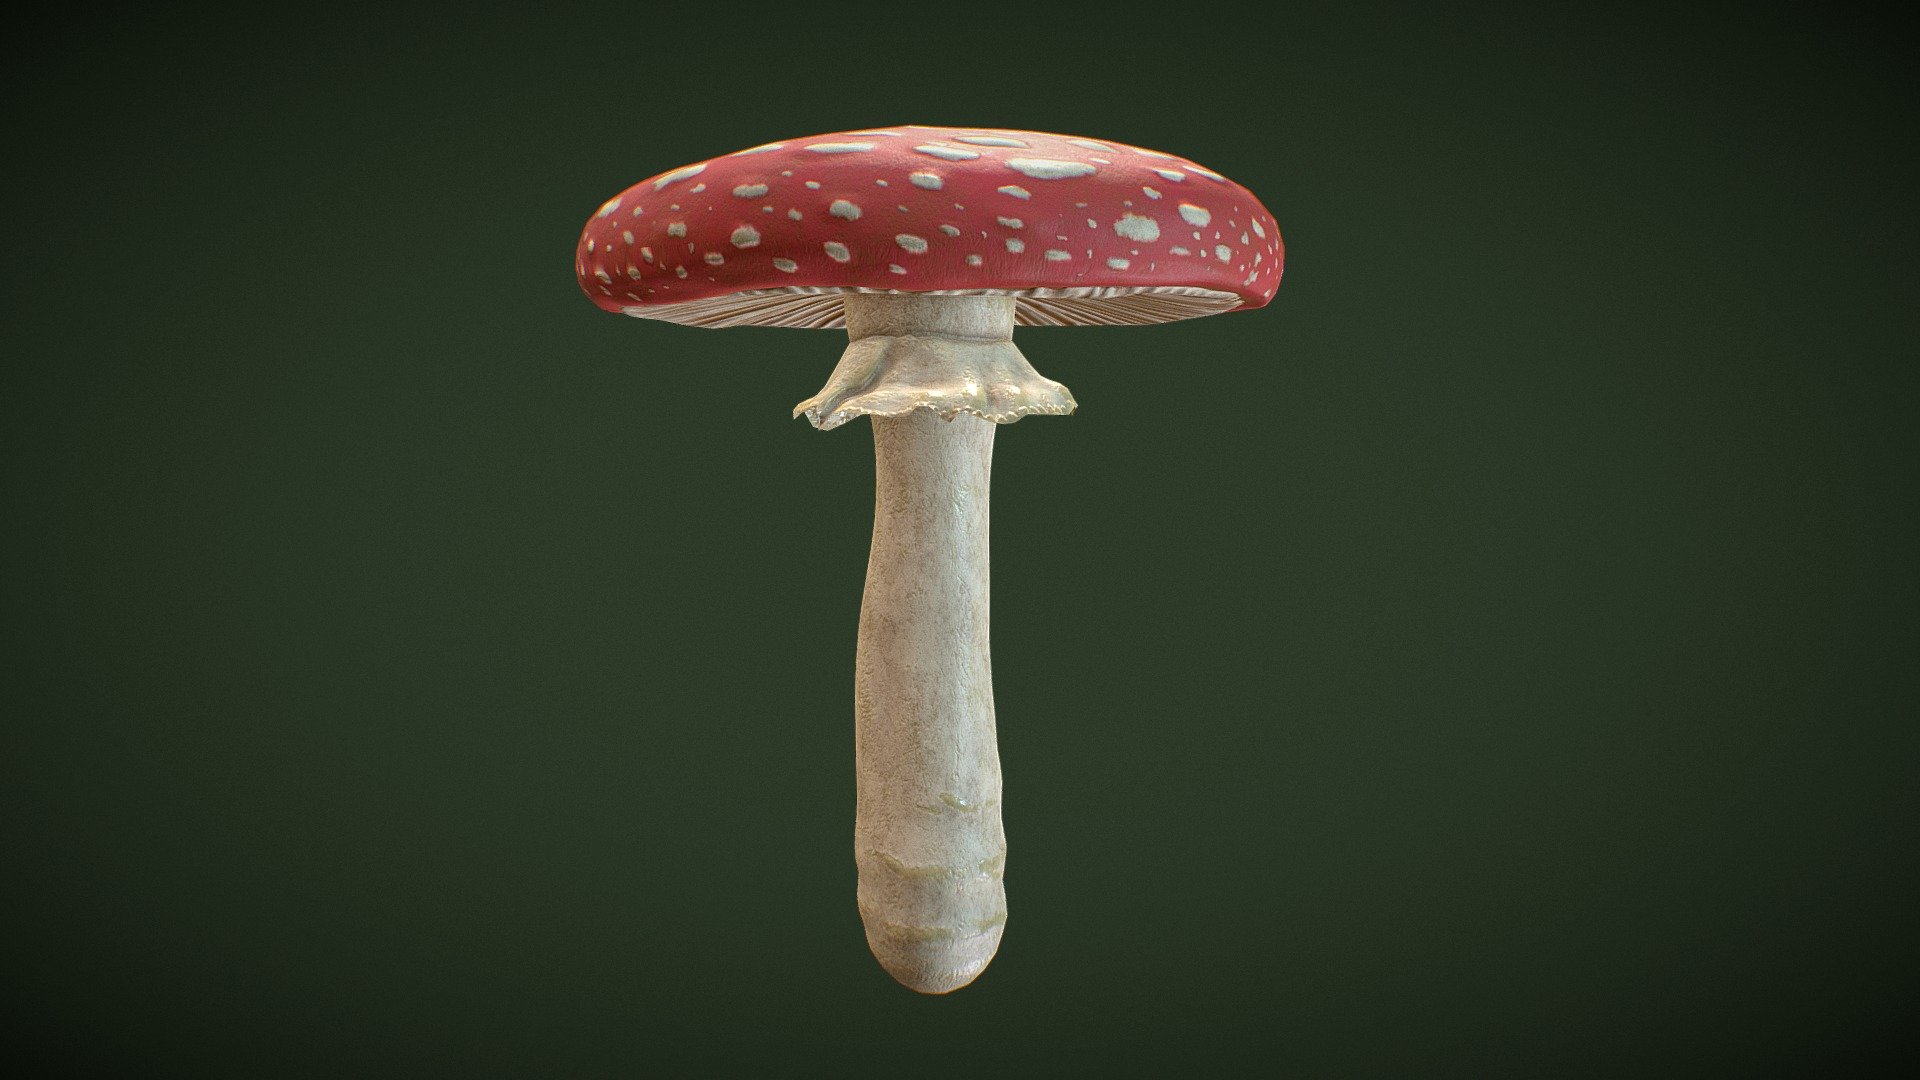 Made using 3ds Max, ZBrush and Substance Painter.

Wikipedia:

Amanita muscaria, commonly known as the fly agaric or fly amanita, is a basidiomycete mushroom, one of many in the genus Amanita. It is also a muscimol mushroom. Native throughout the temperate and boreal regions of the Northern Hemisphere, Amanita muscaria has been unintentionally introduced to many countries in the Southern Hemisphere, generally as a symbiont with pine and birch plantations, and is now a true cosmopolitan species. It associates with various deciduous and coniferous trees.

Arguably the most iconic toadstool species, the fly agaric is a large white-gilled, white-spotted, usually red mushroom, and is one of the most recognisable and widely encountered in popular culture 3d model